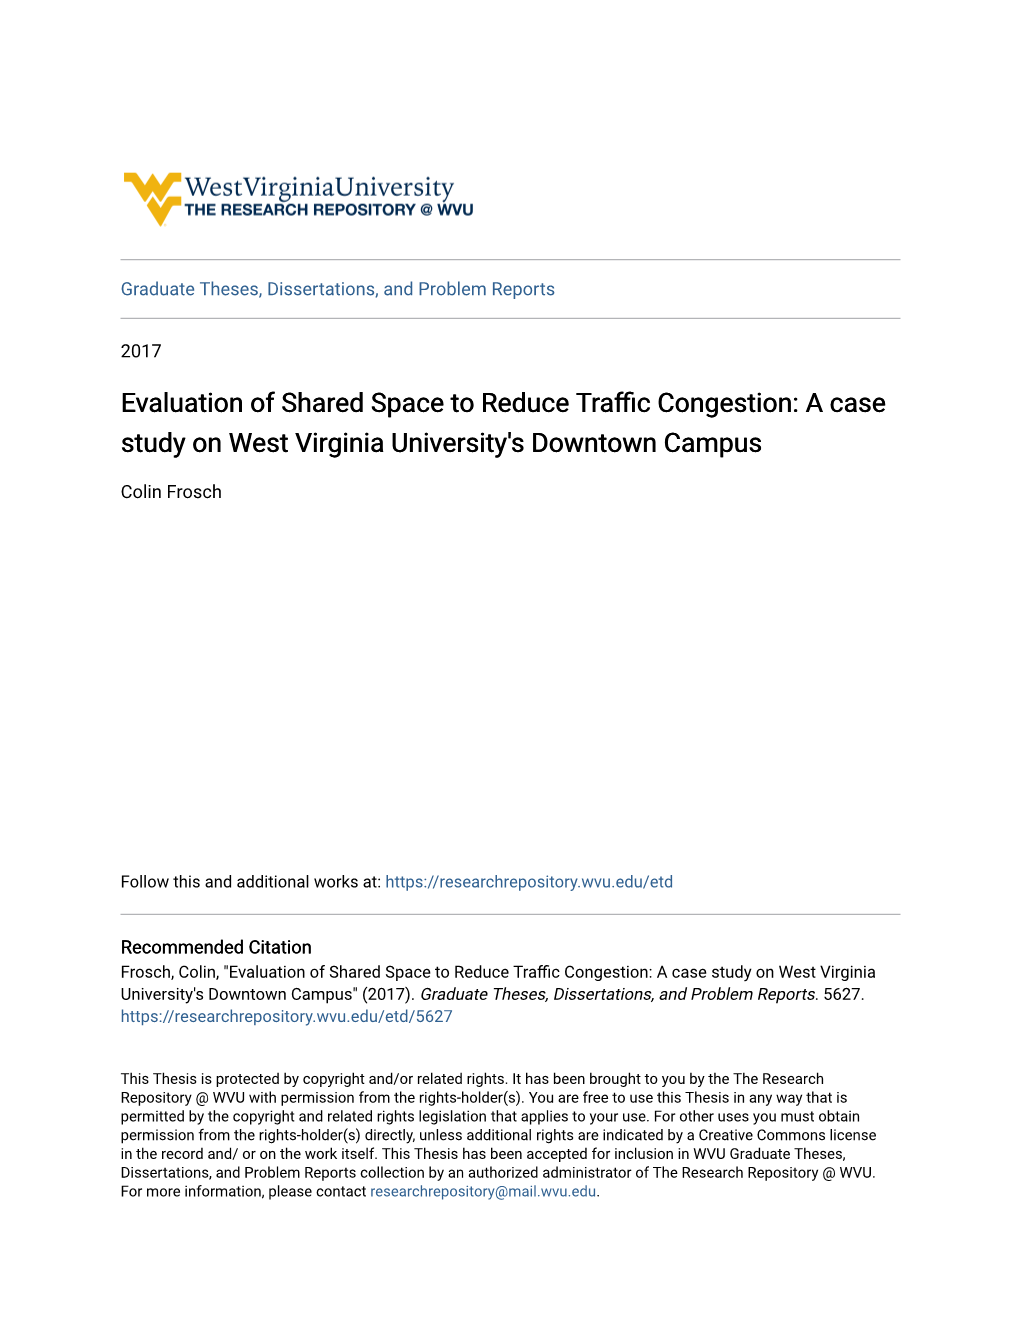 Evaluation of Shared Space to Reduce Traffic Congestion: a Case Study on West Virginia University's Downtown Campus